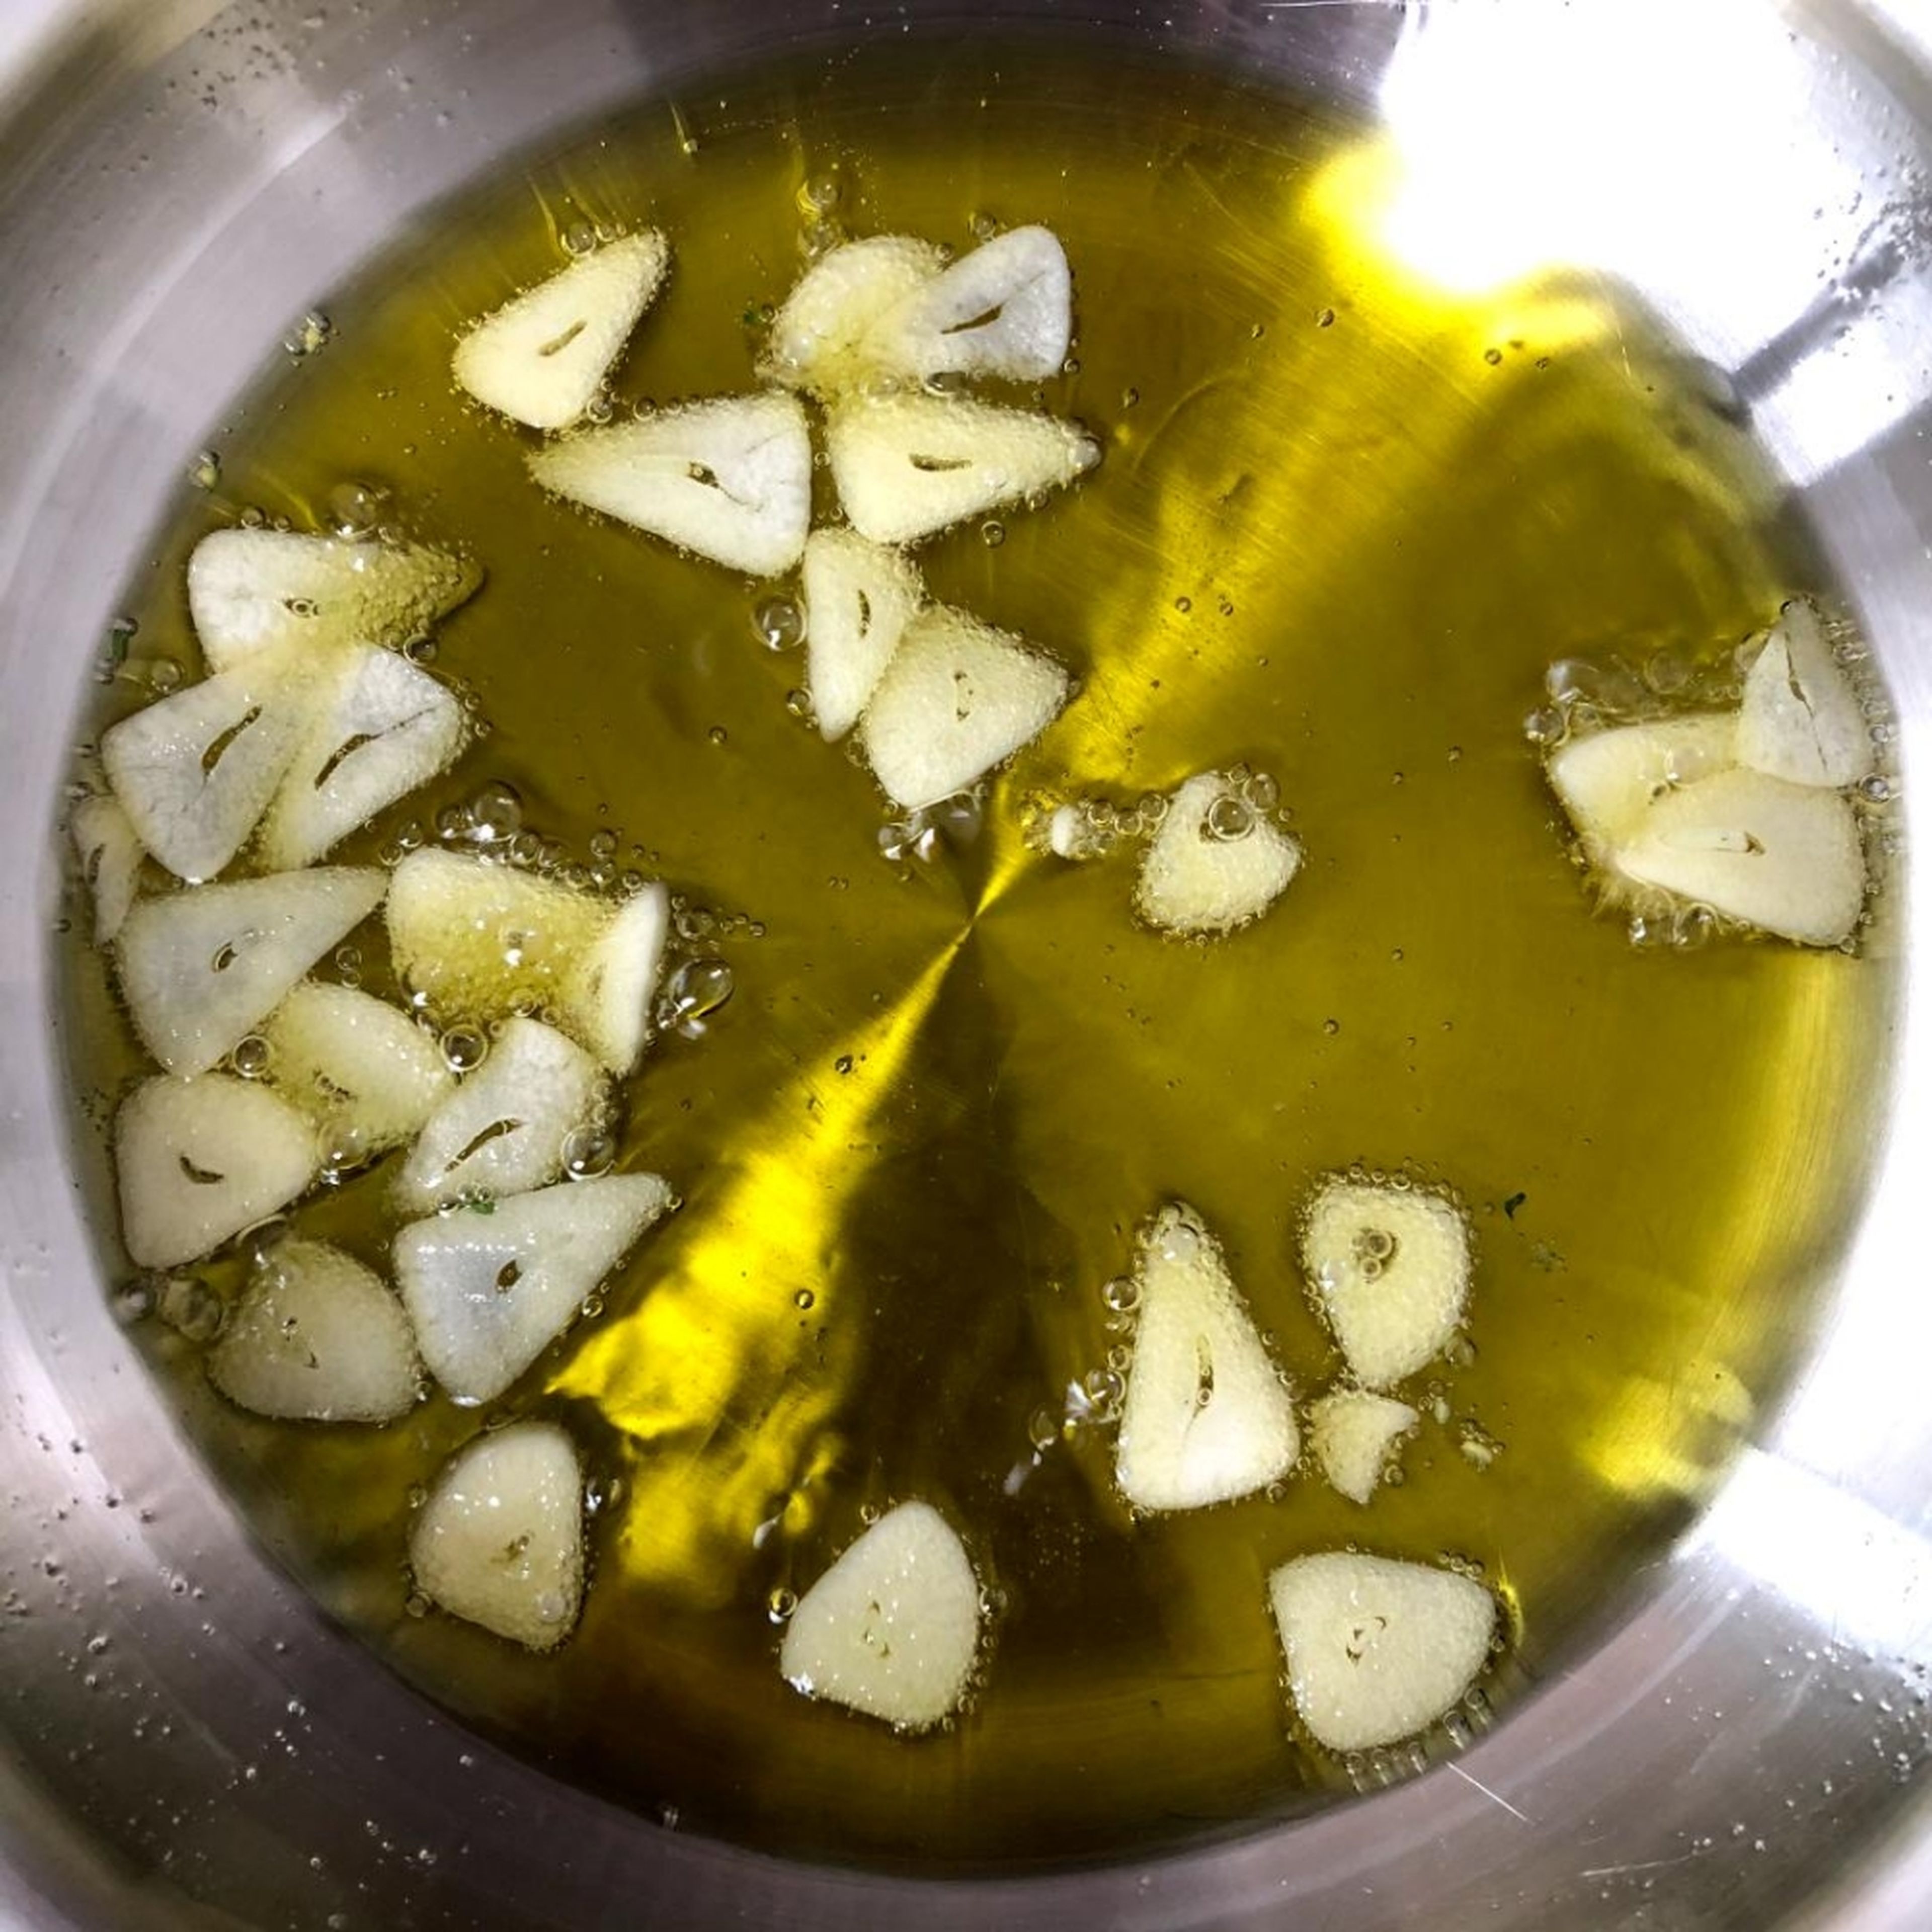 Pour 120 ml of olive oil in a small pan and add the garlic slices. Now slowly heat the oil to medium heat. Once the oil is hot and the garlic is roasted, add the parsley, lemon zest and salt to it. (Be careful, it will splatter a little.) Immediately after, remove the pan from the heat, as the gremolata is ready.